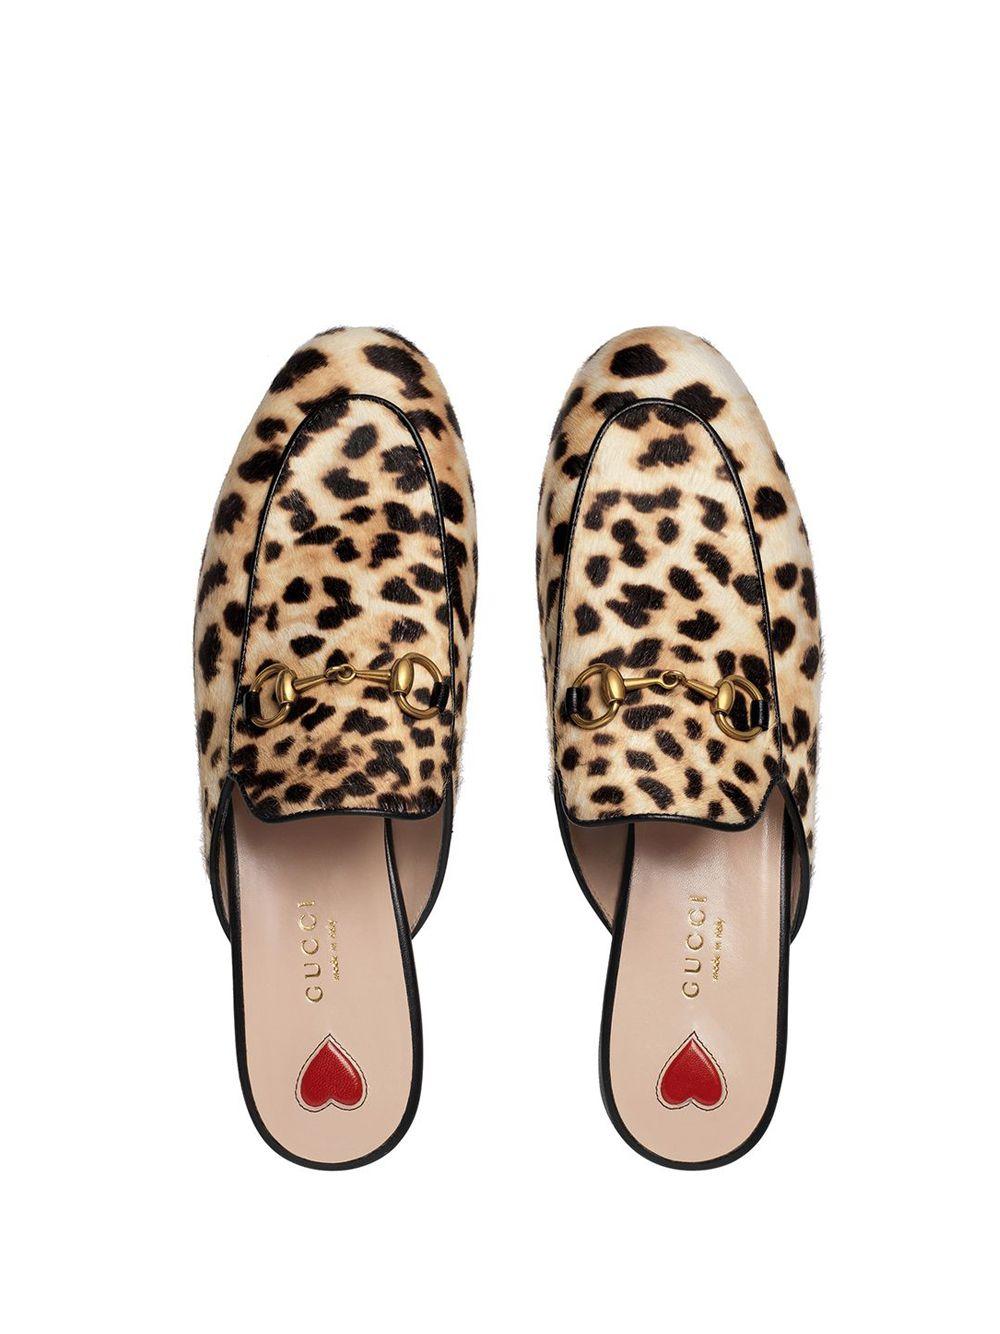 Gucci Leopard Princetown Pony Mules | Lyst